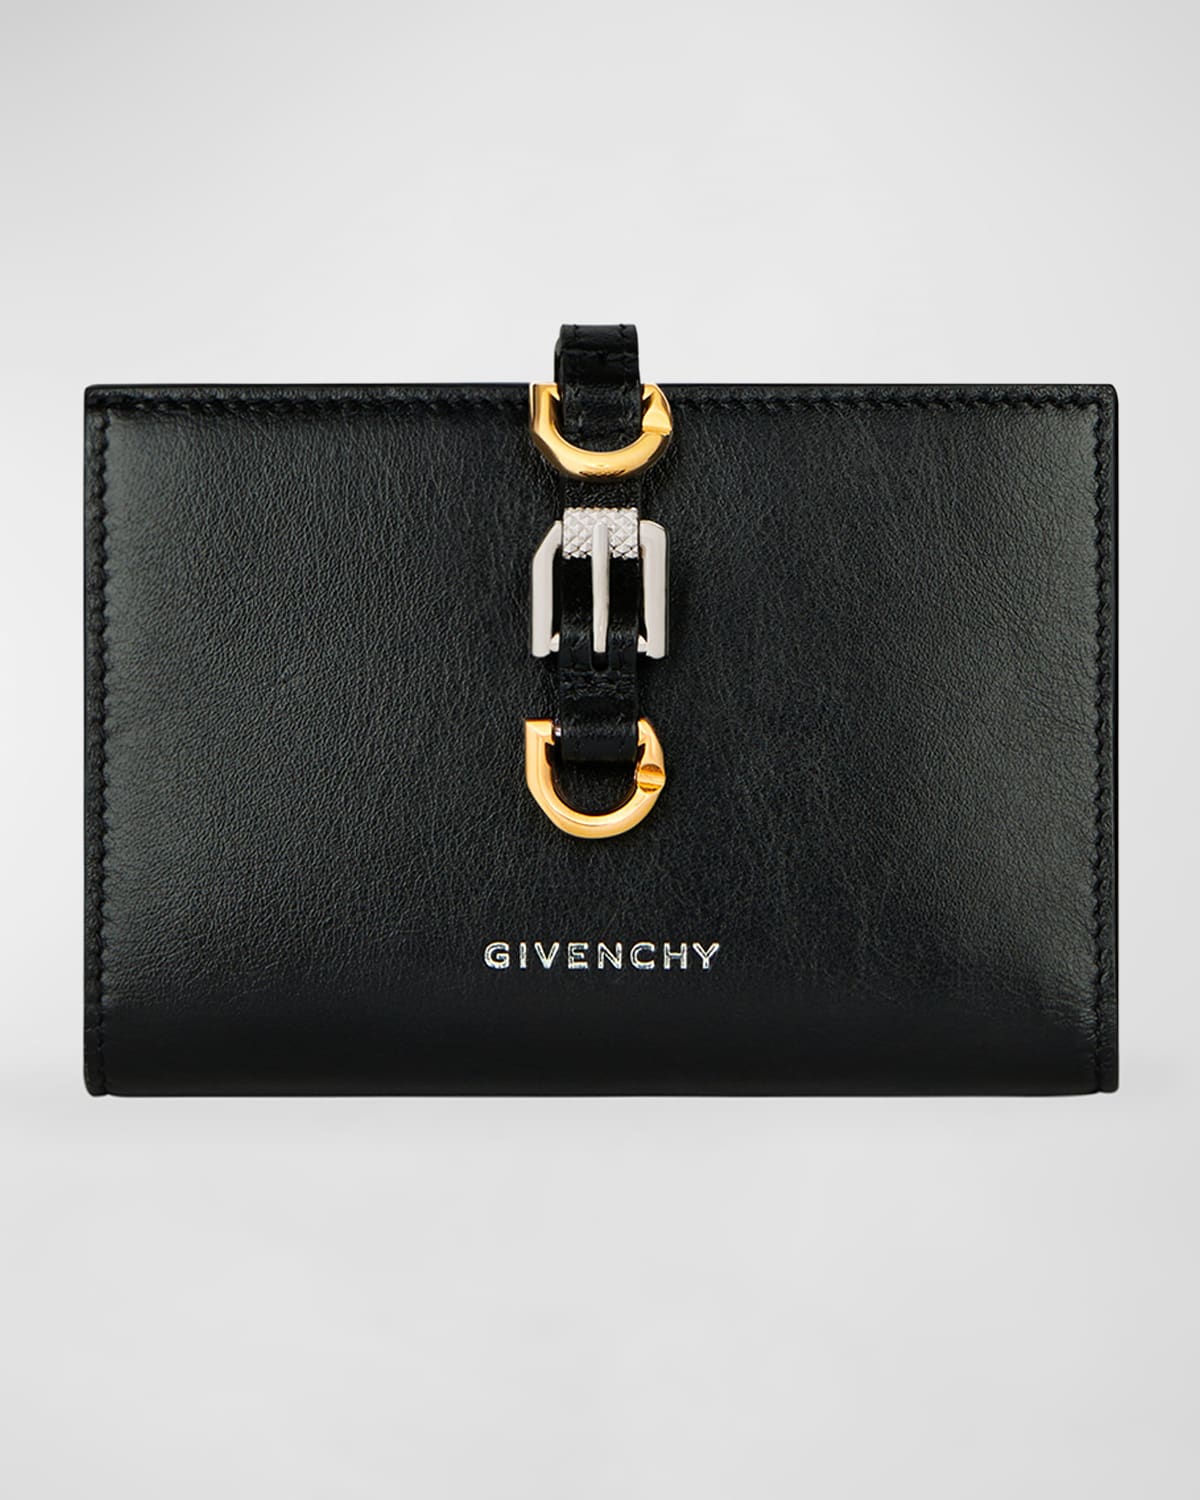 GIVENCHY VOYOU BIFOLD WALLET IN TUMBLED LEATHER